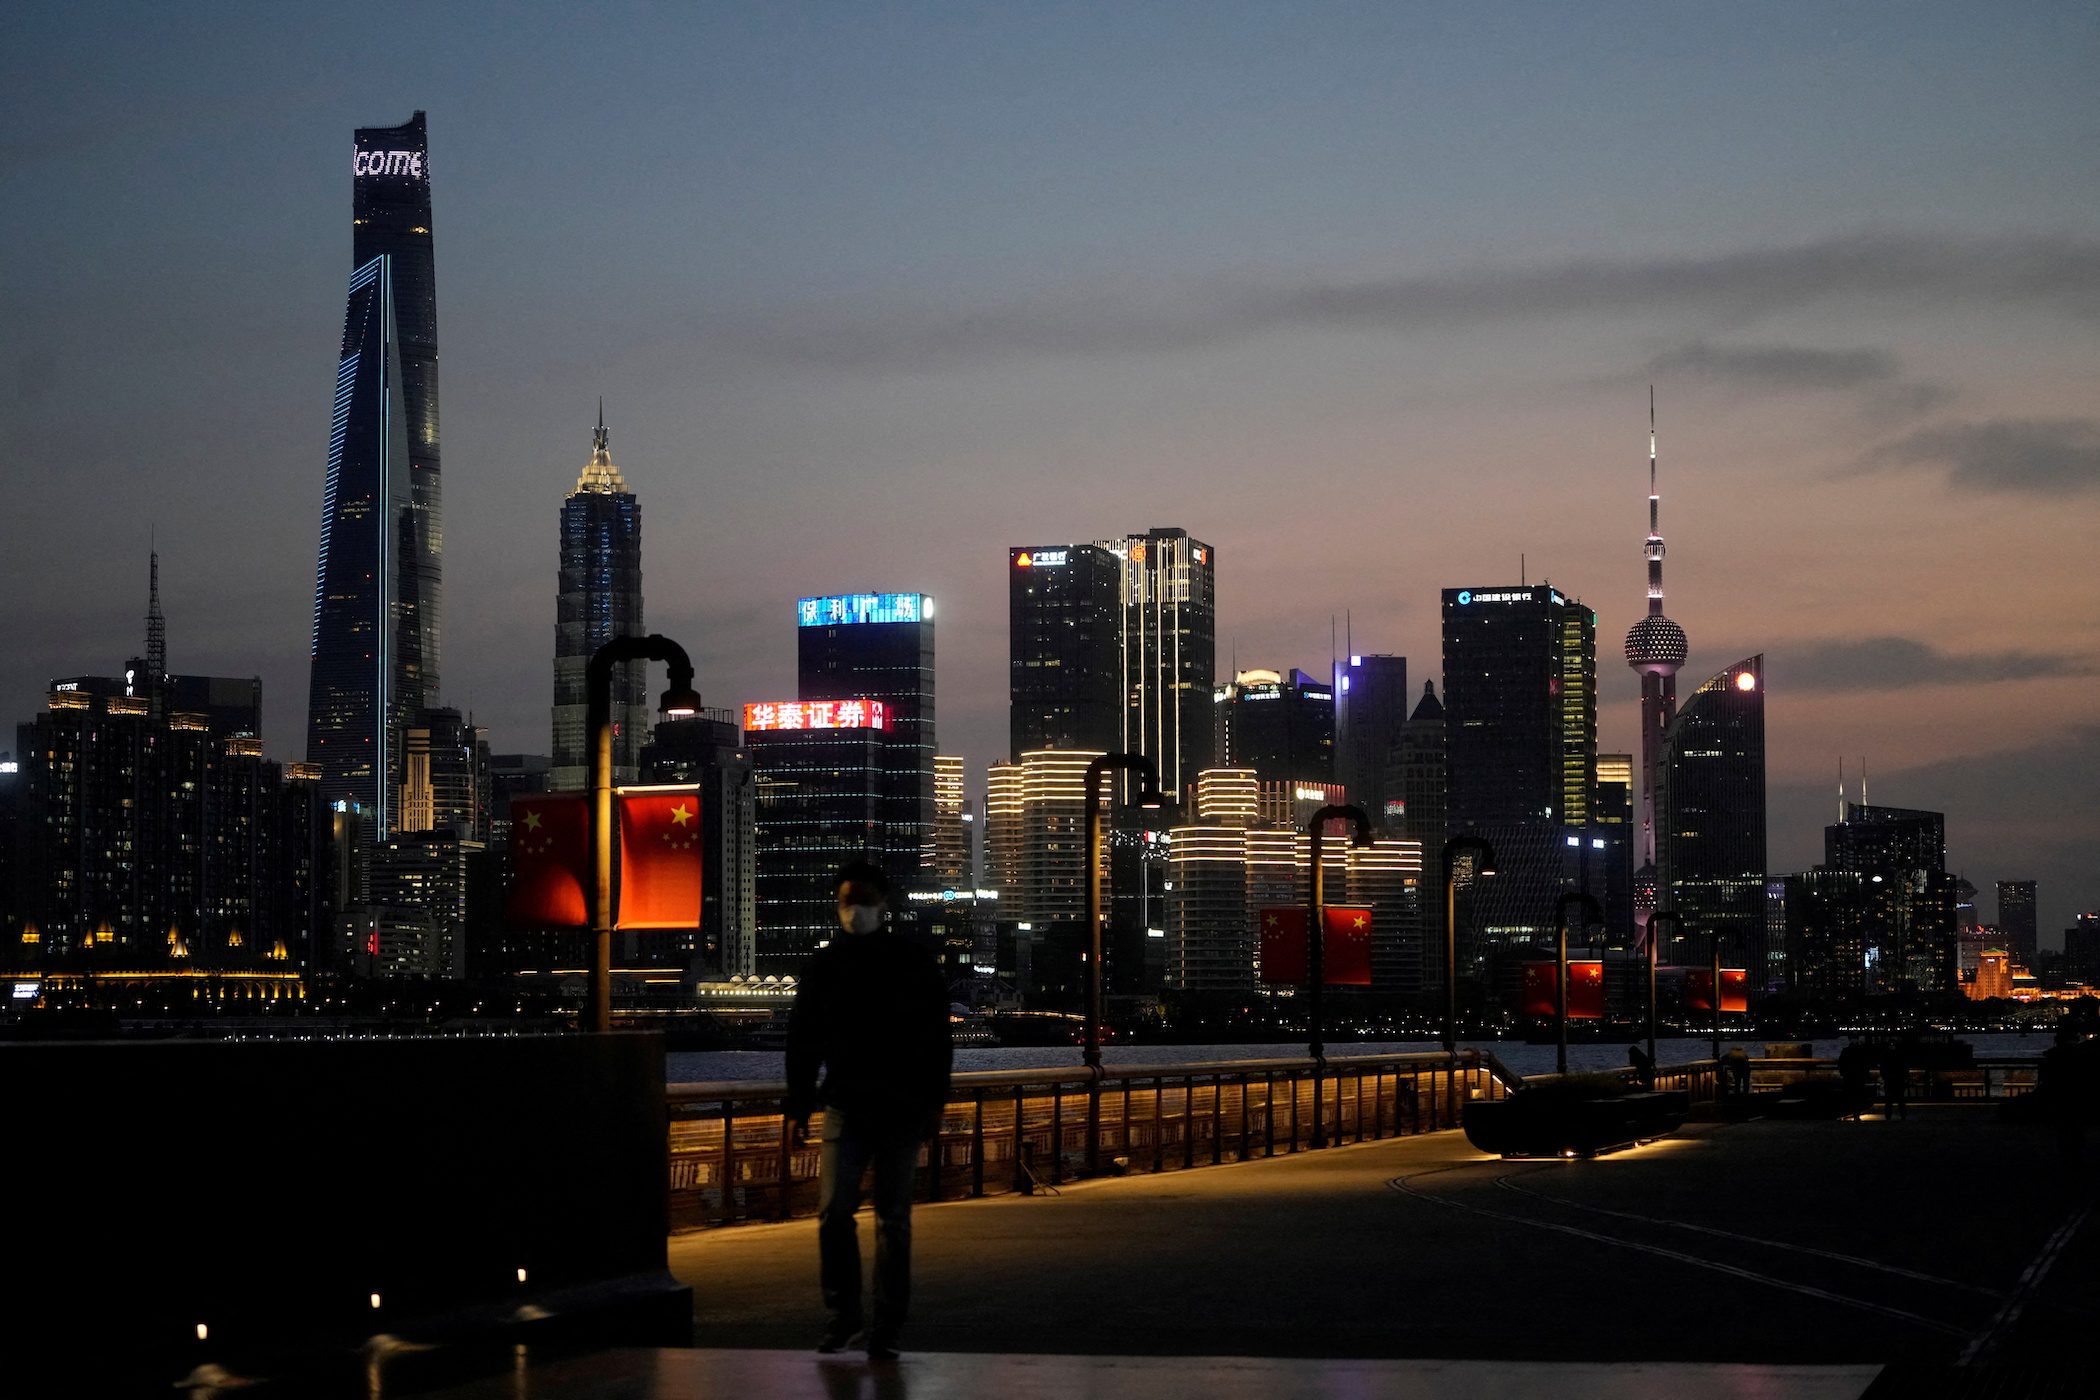 In China’s Wall Street, bankers and traders sleep in offices to beat Shanghai COVID-19 lockdown